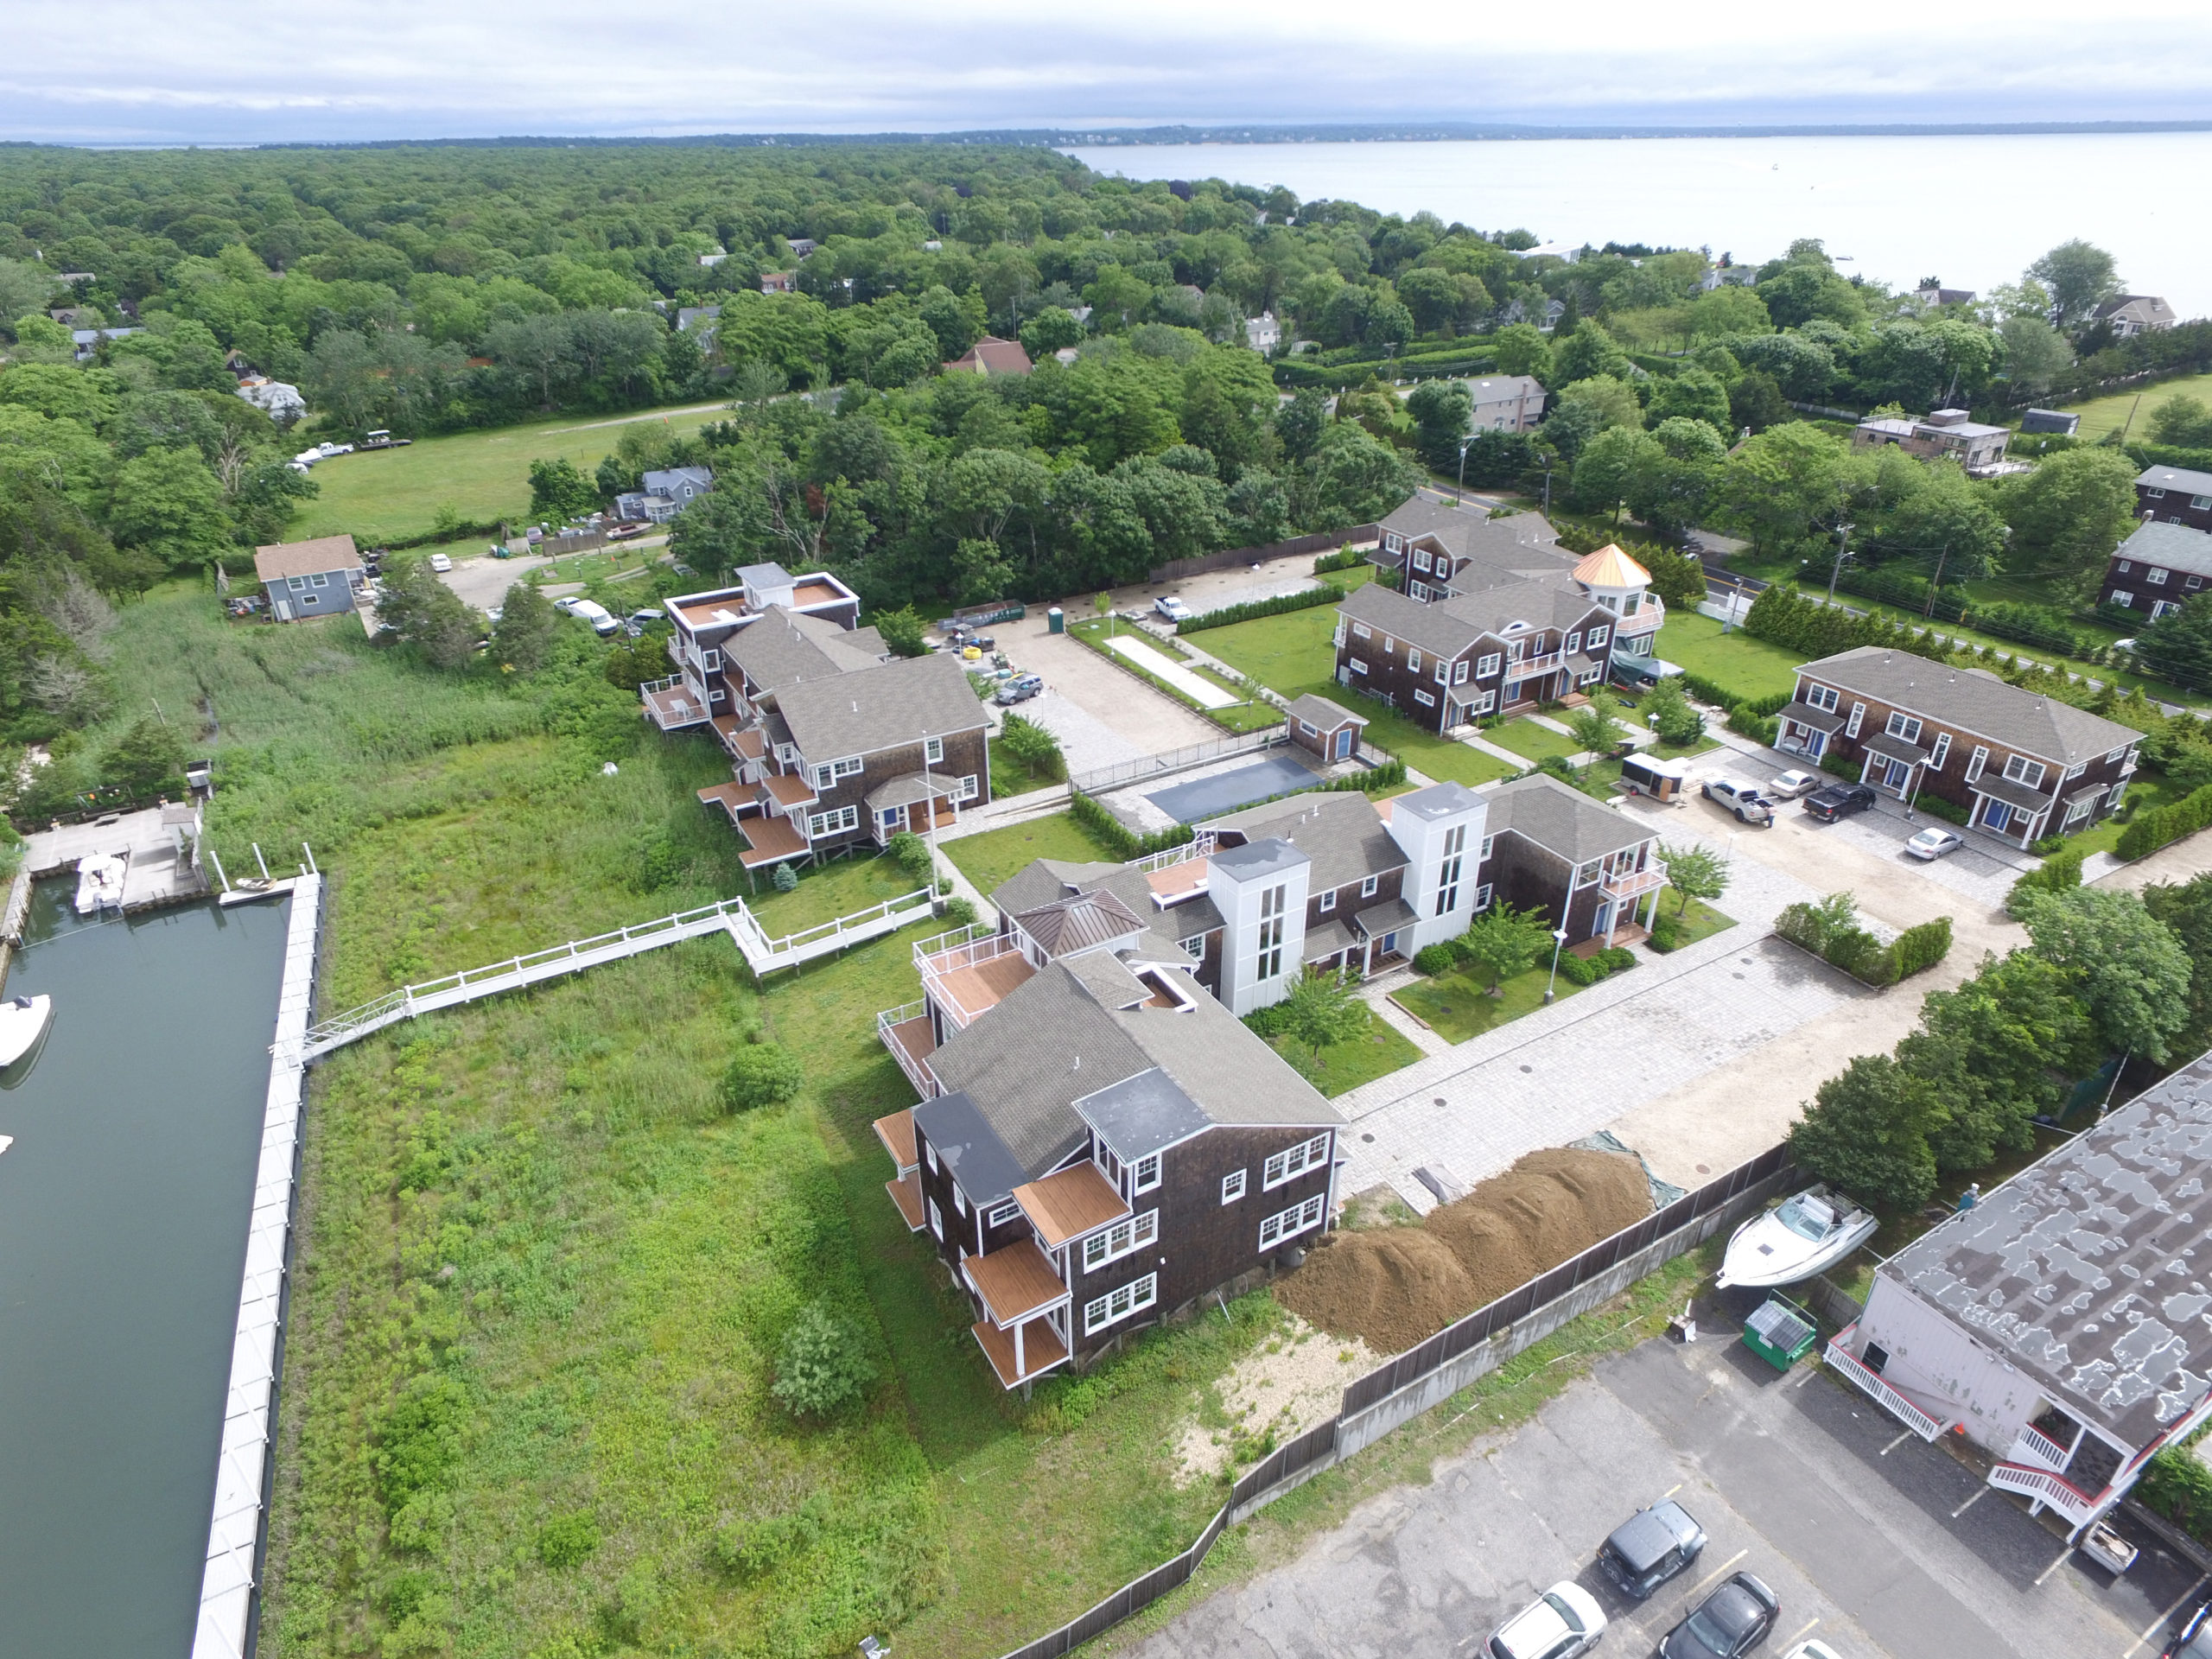 August 30 -- A court has ordered the sale of Ponquogue Point, the bankrupt condominium project on Foster Avenue in Hampton Bays that stalled when it was near completion. Ponquogue Point has sat mostly idle for a few years as the project has been caught up in legal battles. But now, with the court-ordered bankruptcy sale, a new owner could soon step in to finish the development, and residents could start moving in shortly thereafter. Meridian InvestmentSales, a New York City real estate firm, is marketing Ponquogue Point after the court approved the firm in a July 23 order.